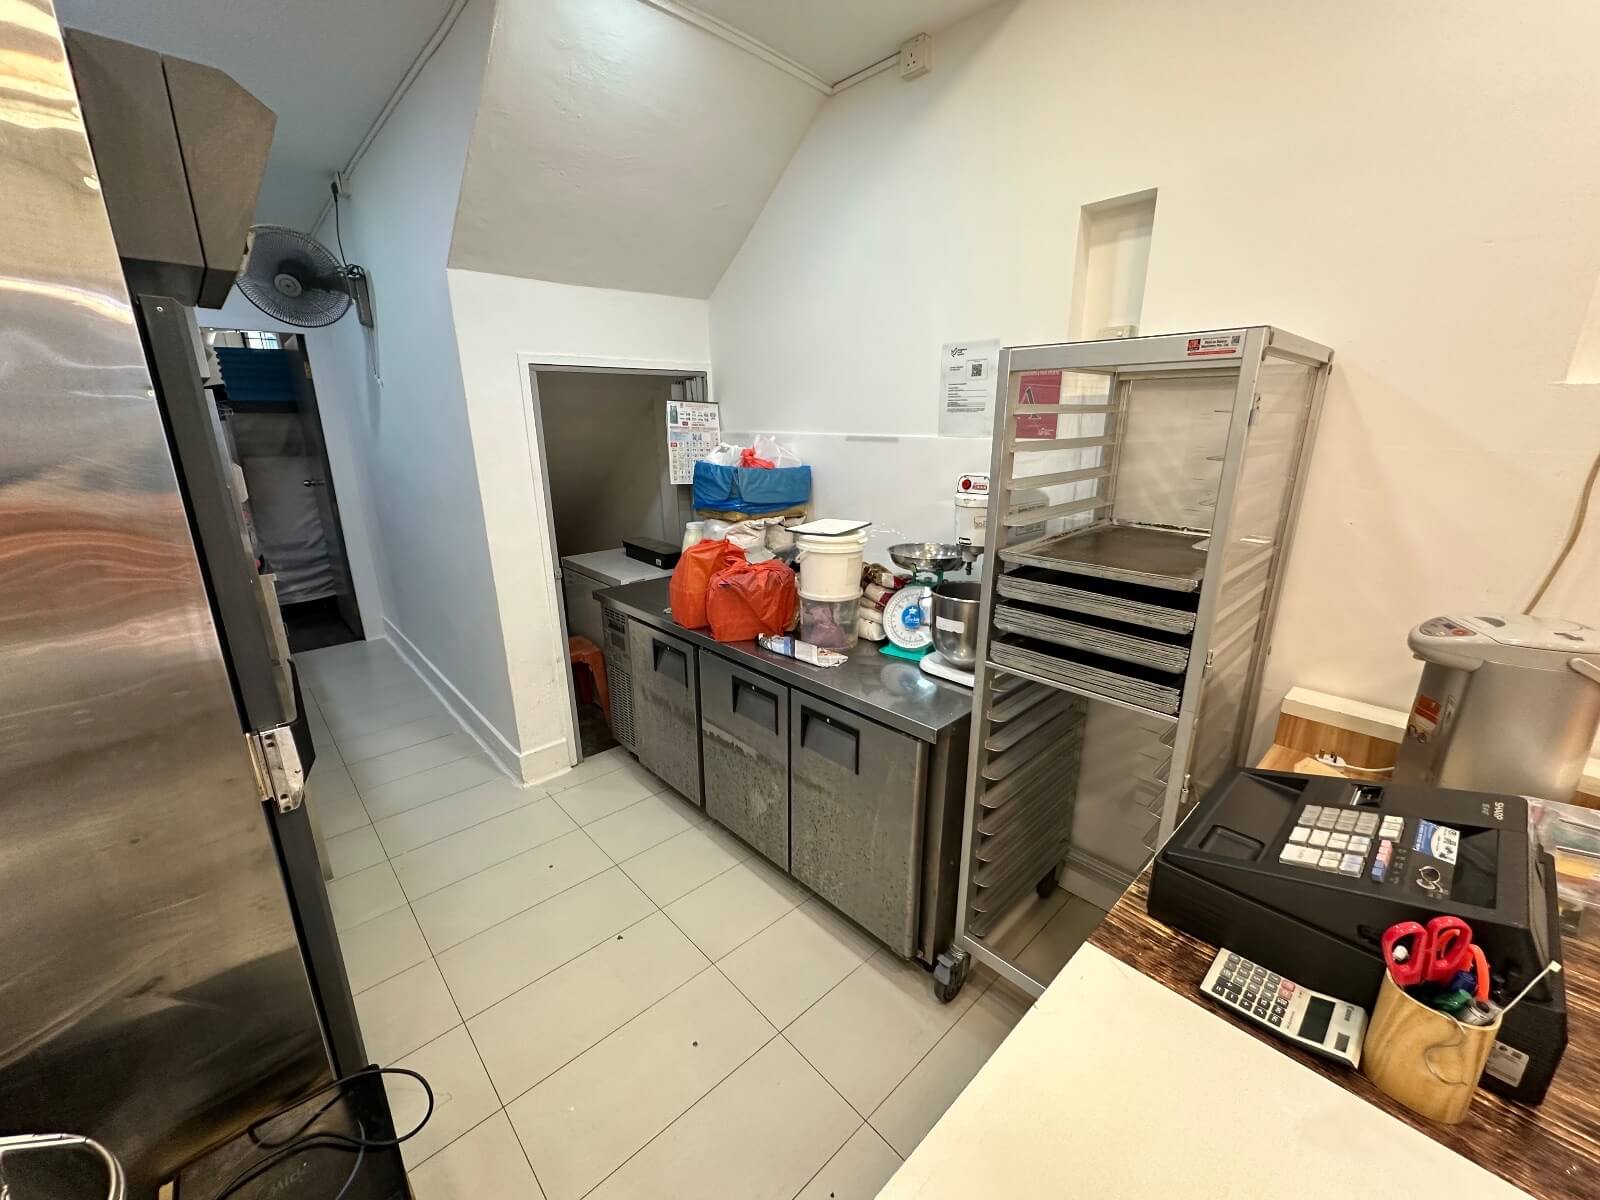 (Expired)Great Opportunity To Own A Bakery With Full Equipment Situated In A Good Location!